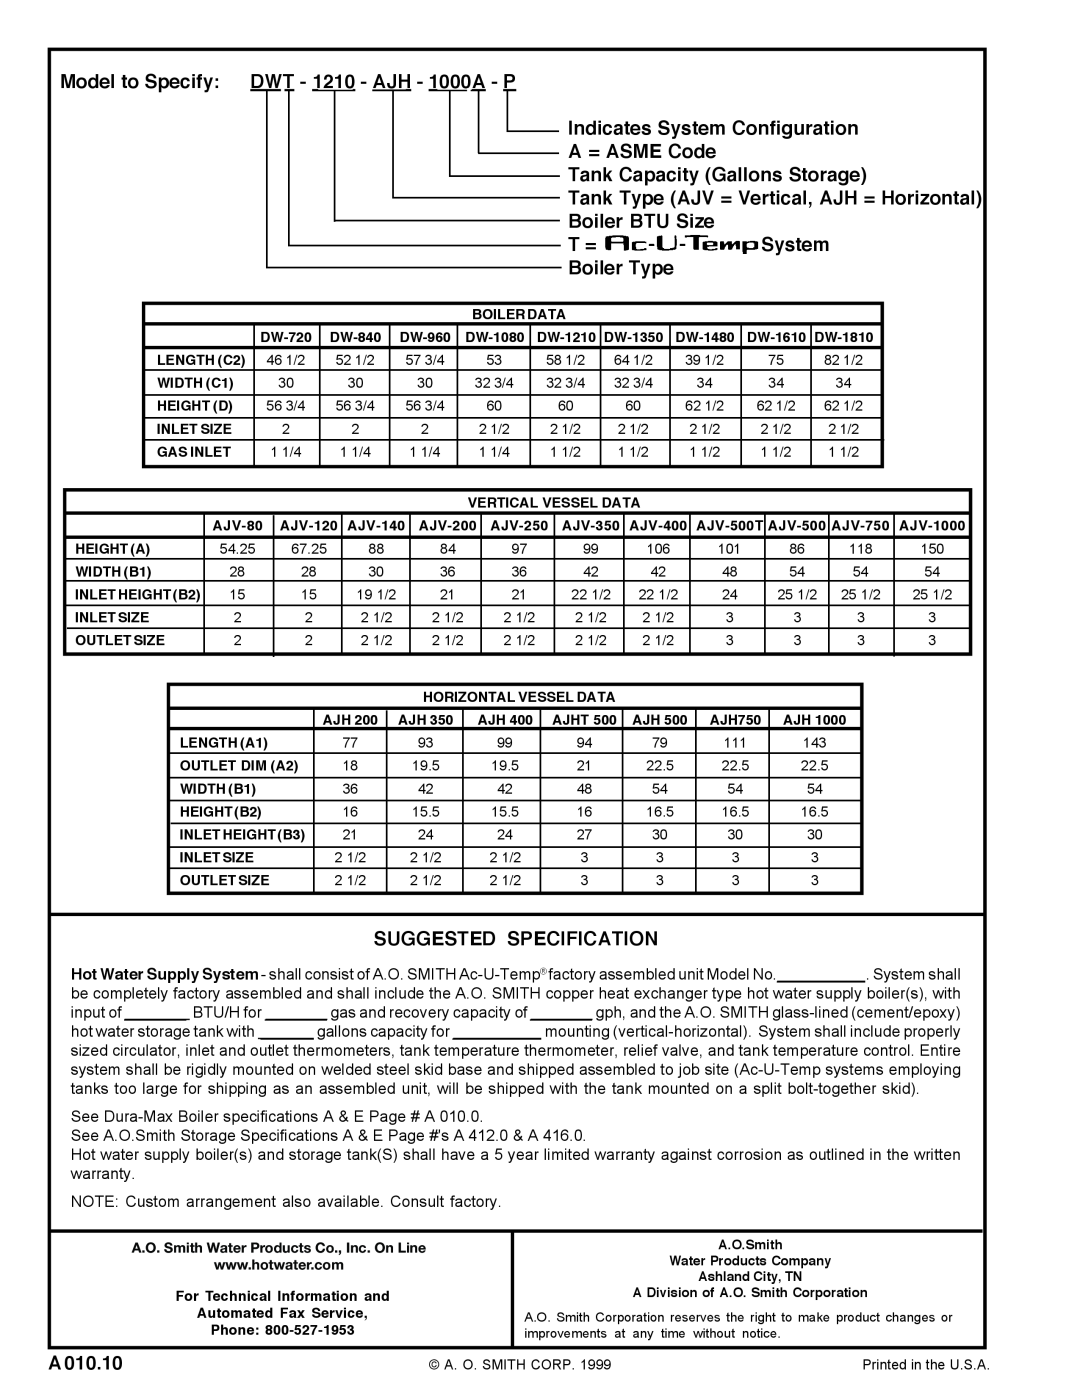 A.O. Smith AJH - 1000A - P, DWT - 1210 warranty Model to Specify, See Dura-Max Boiler specifications A & E Page # A 